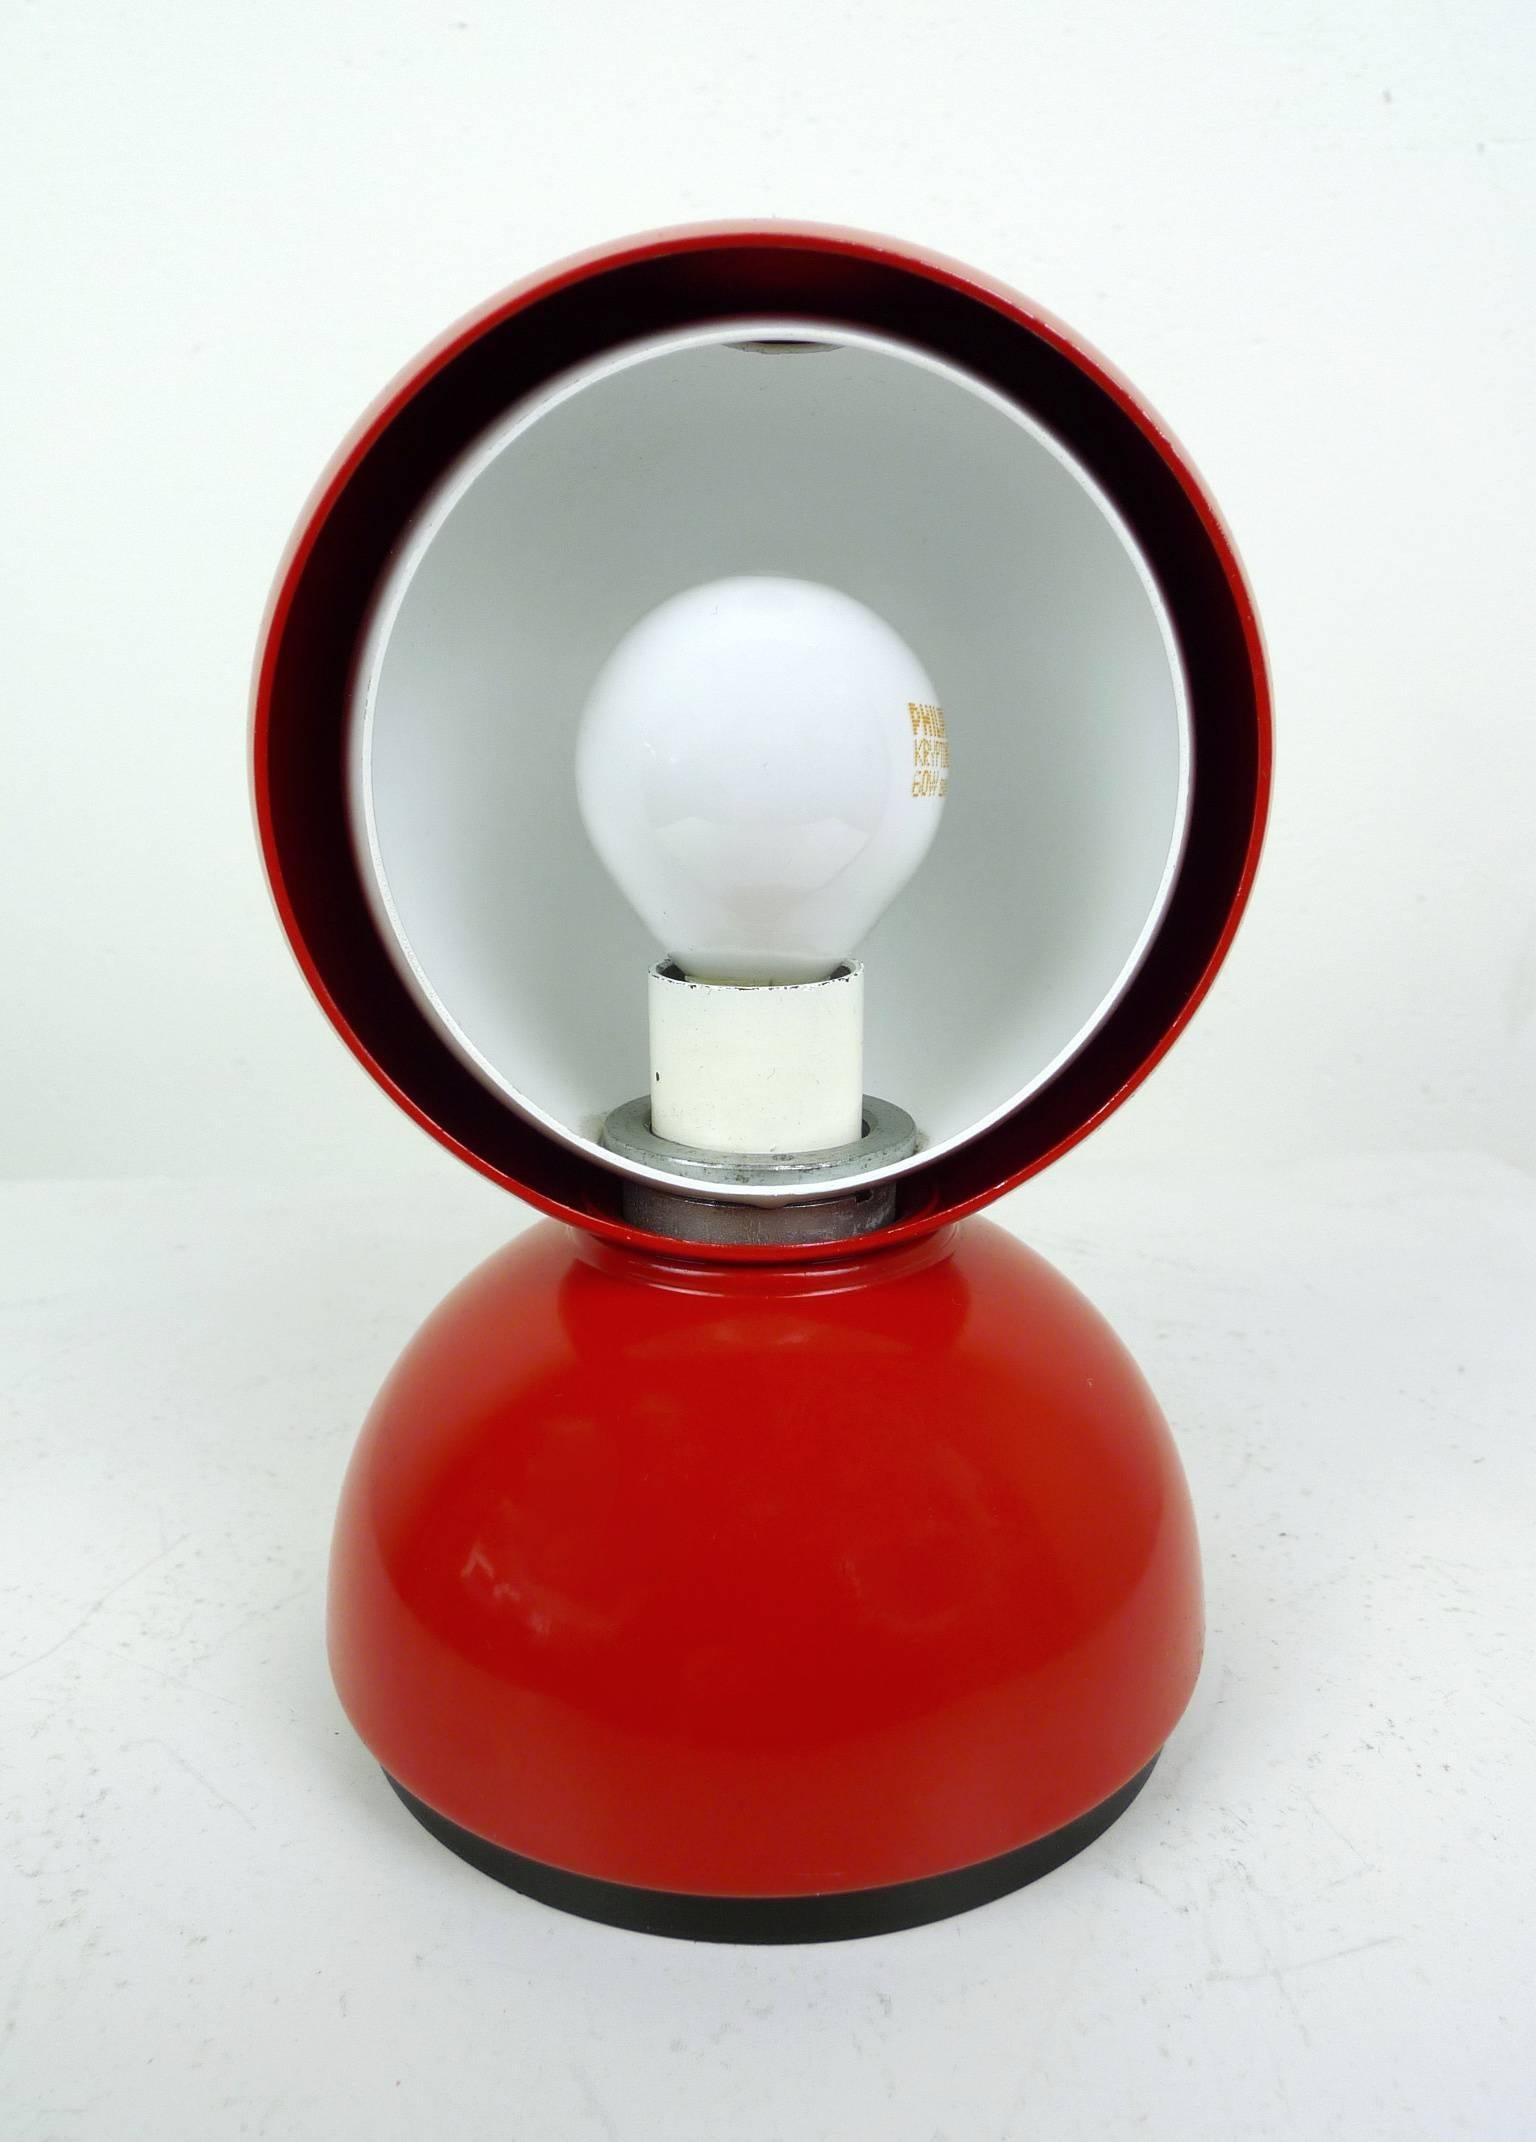 This Eclisse table or wall lamp was designed in 1967 by Vico Magistretti and produced by Artemide in Italy. The red-painted metal body surrounds a white hemisphere, which regulates the light intensity. The effect of the light is modeled on the moon